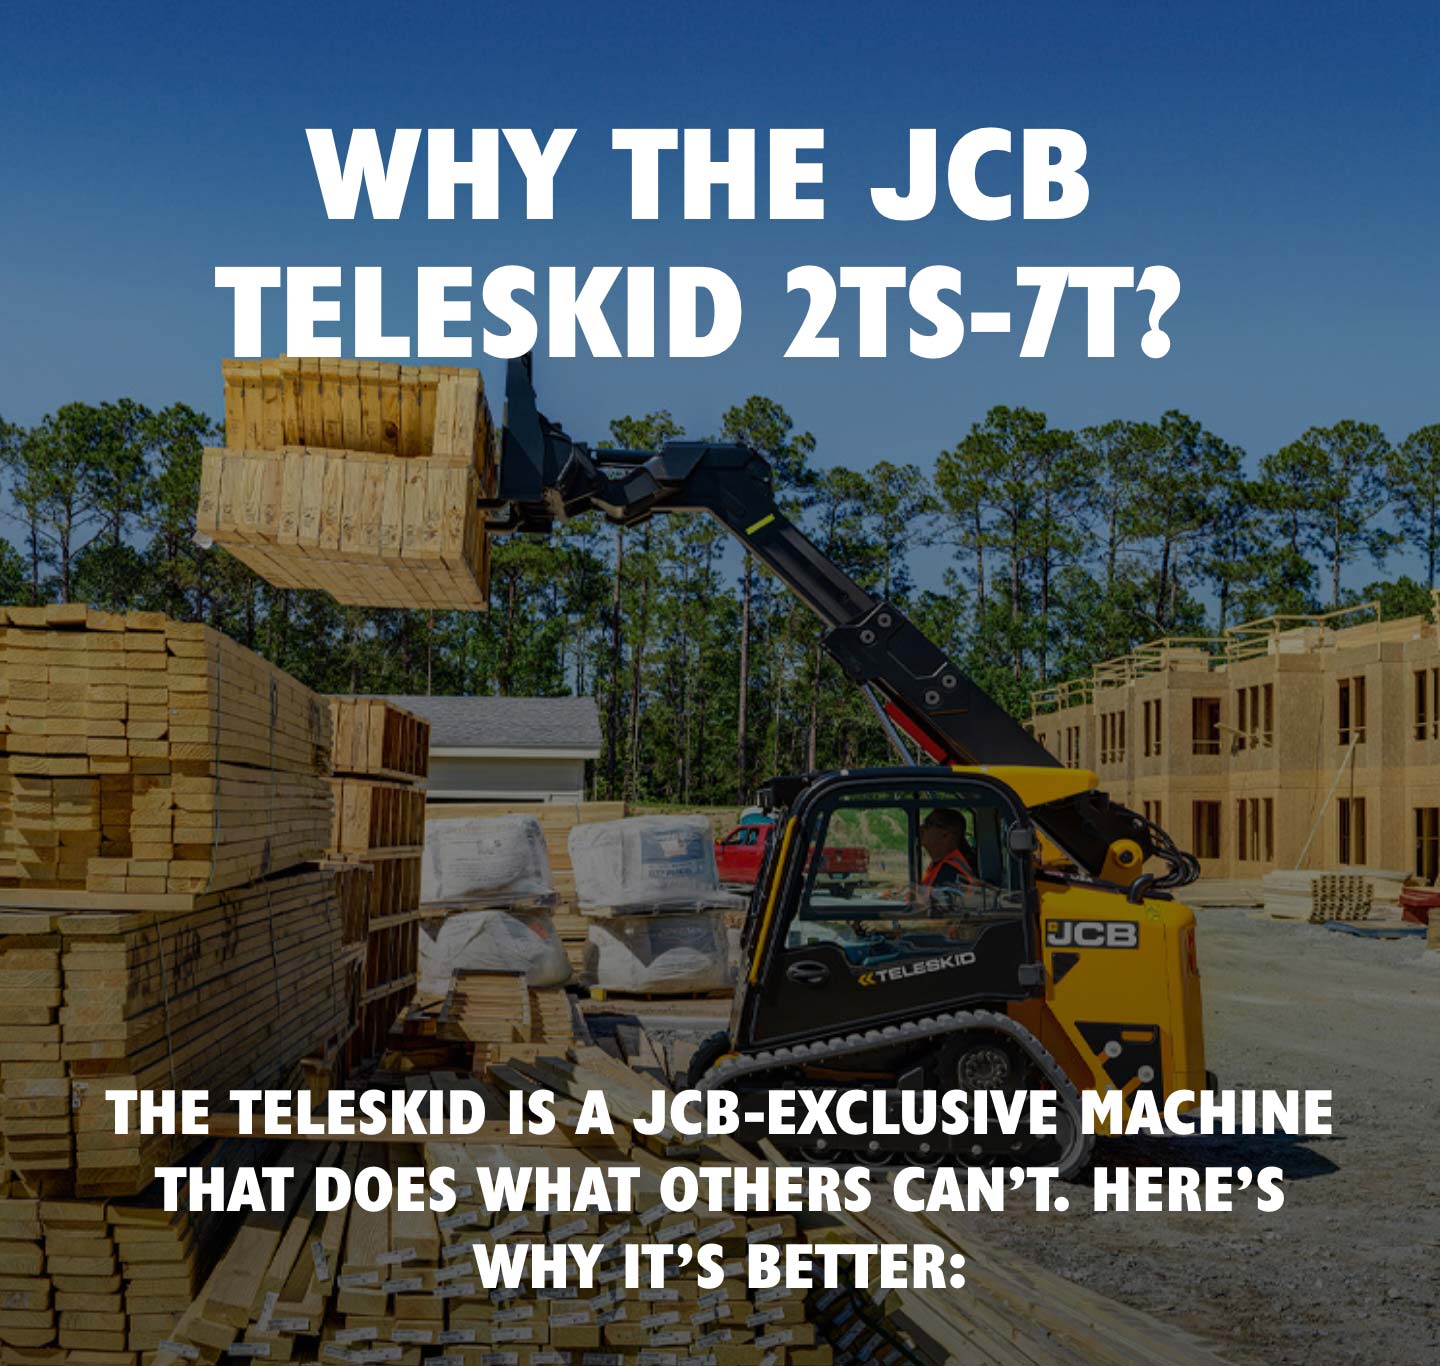 WHY THE JCB TELESKID 2TS-7T? THE TELESKID IS A JCB-EXCLUSIVE MACHINE THAT DOES WHAT OTHERS CAN'T. HERE'S WHY IT'S BETTER: